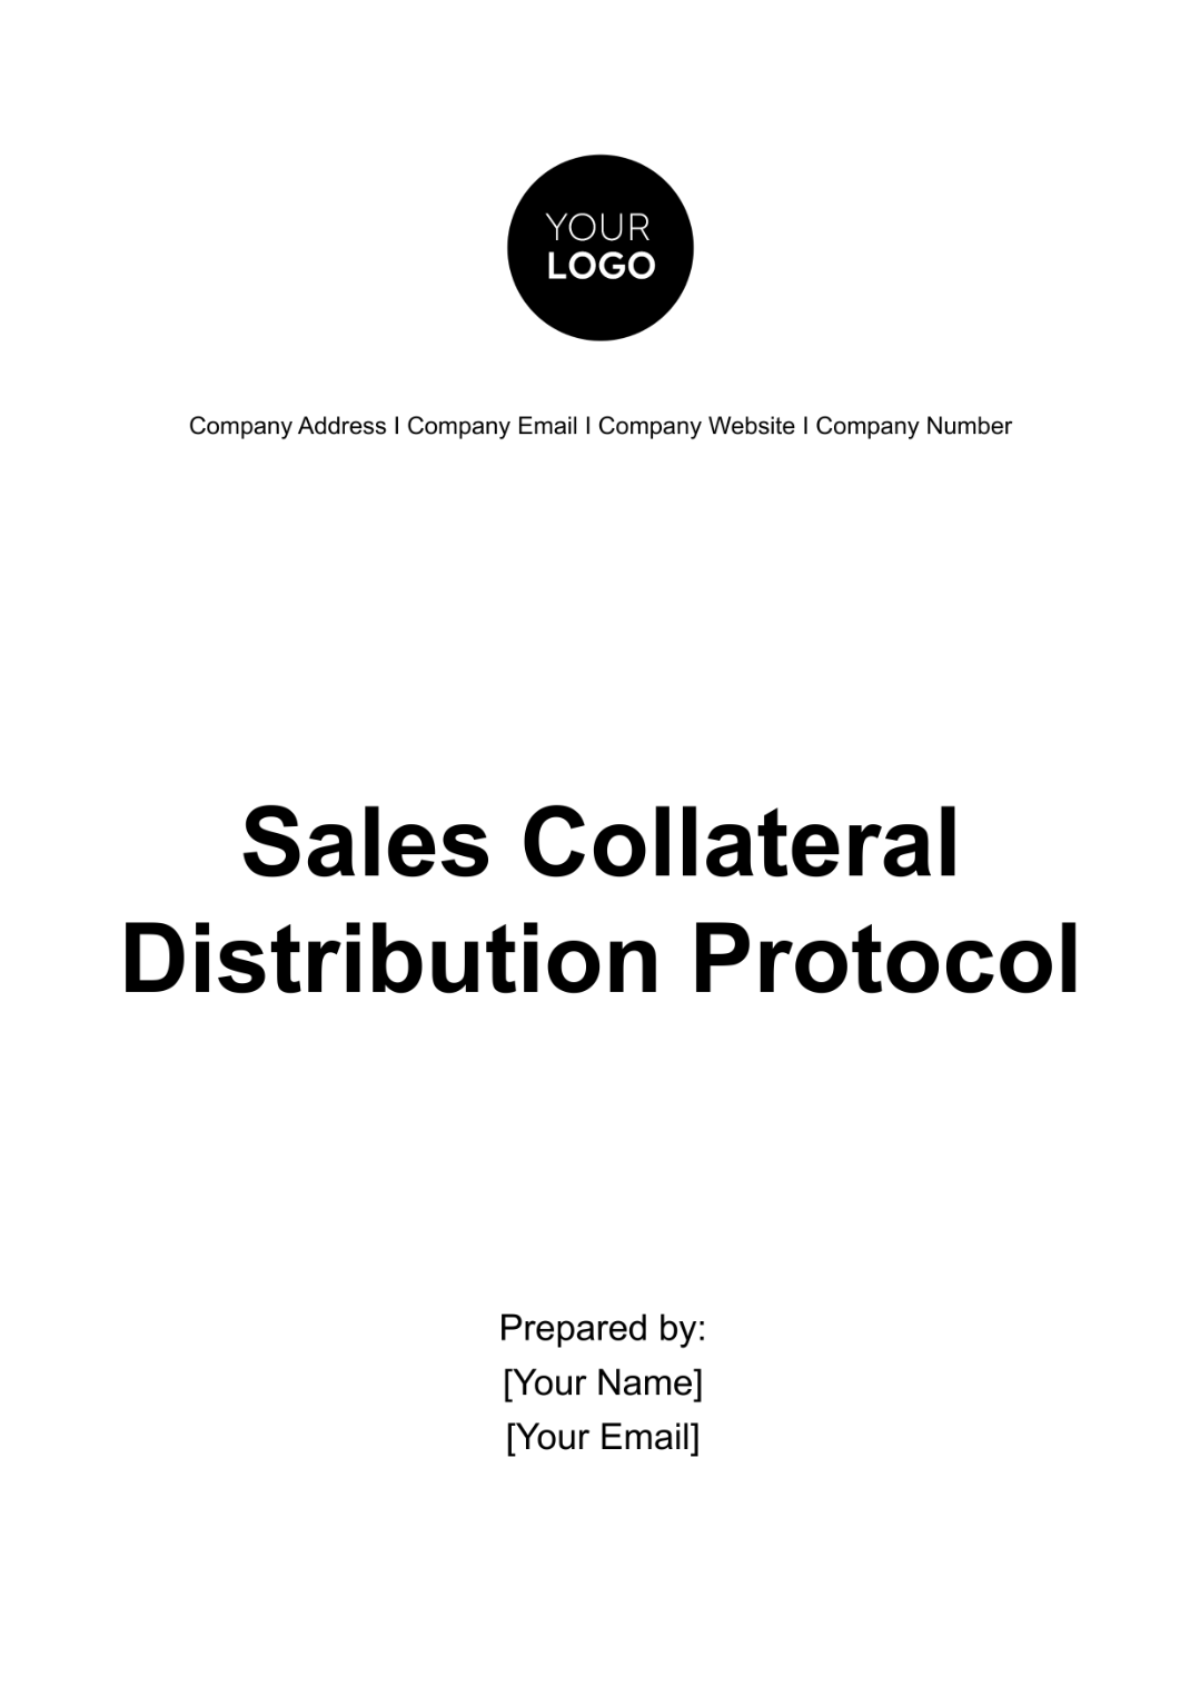 Free Sales Collateral Distribution Protocol Template